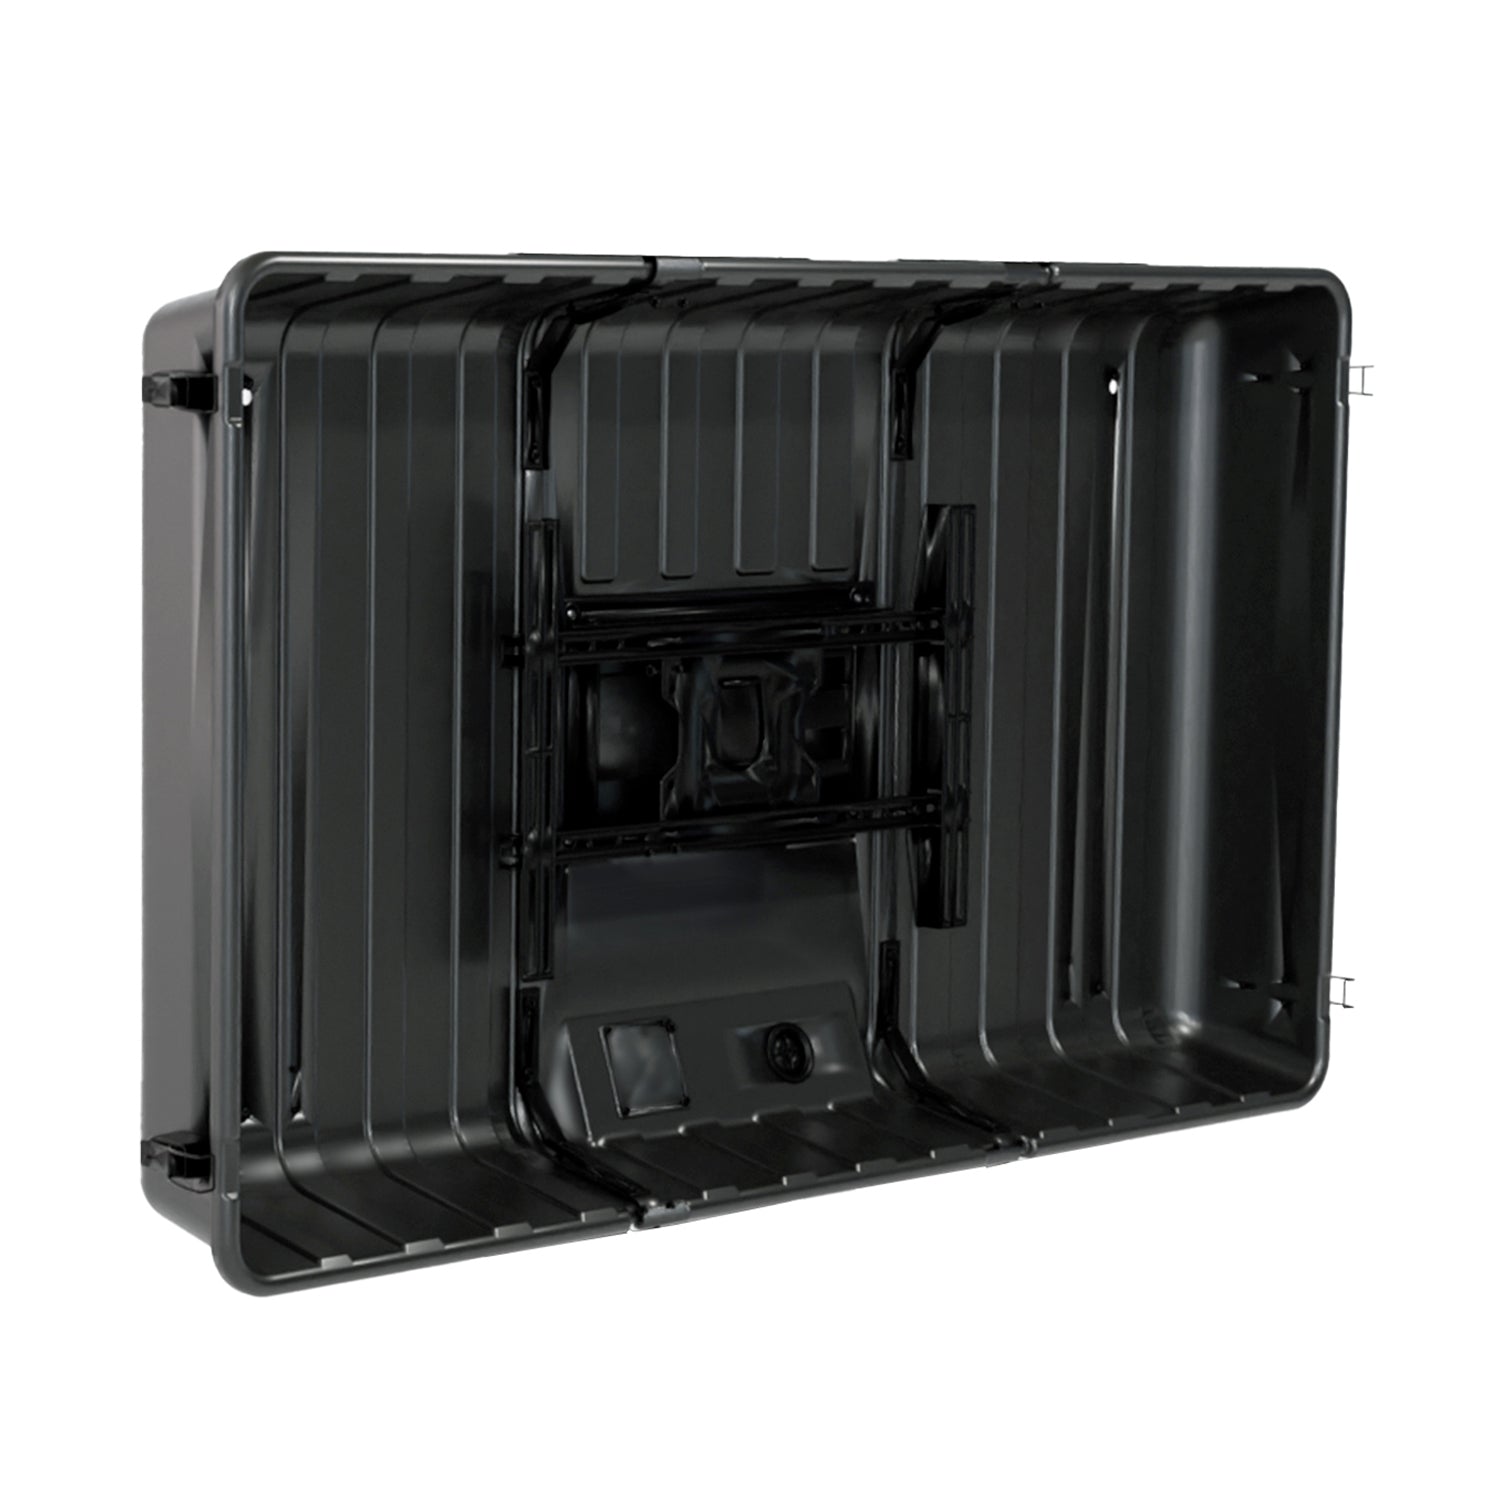 Storm Shell Outdoor Weatherproof TV Enclosure with articulating arm and mounting hardware. Fits up to 75" TV with cover removed